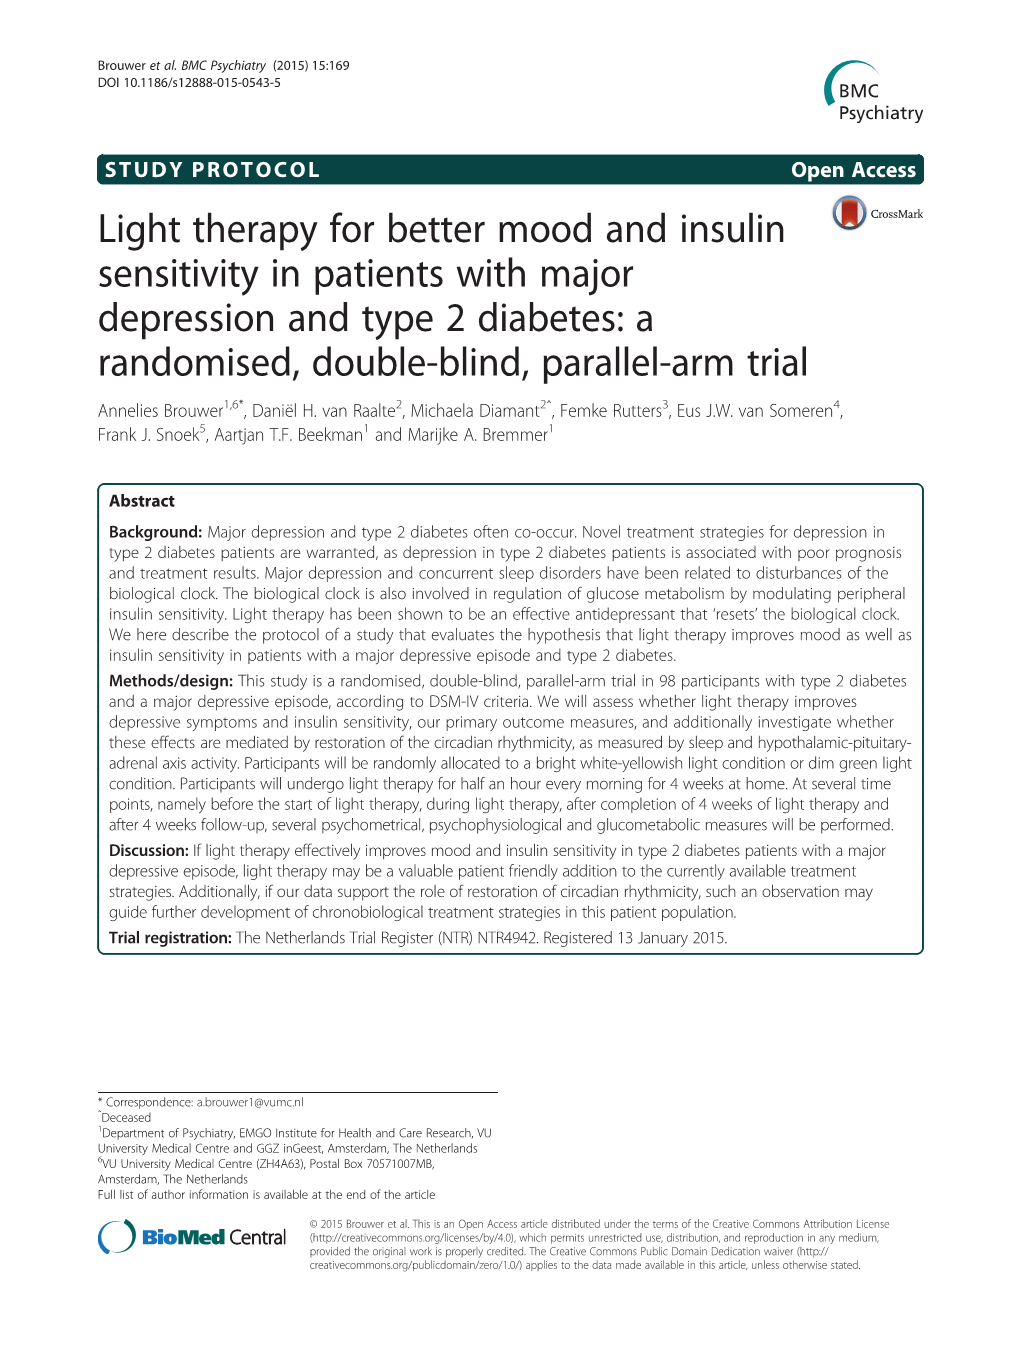 Light Therapy for Better Mood and Insulin Sensitivity in Patients With